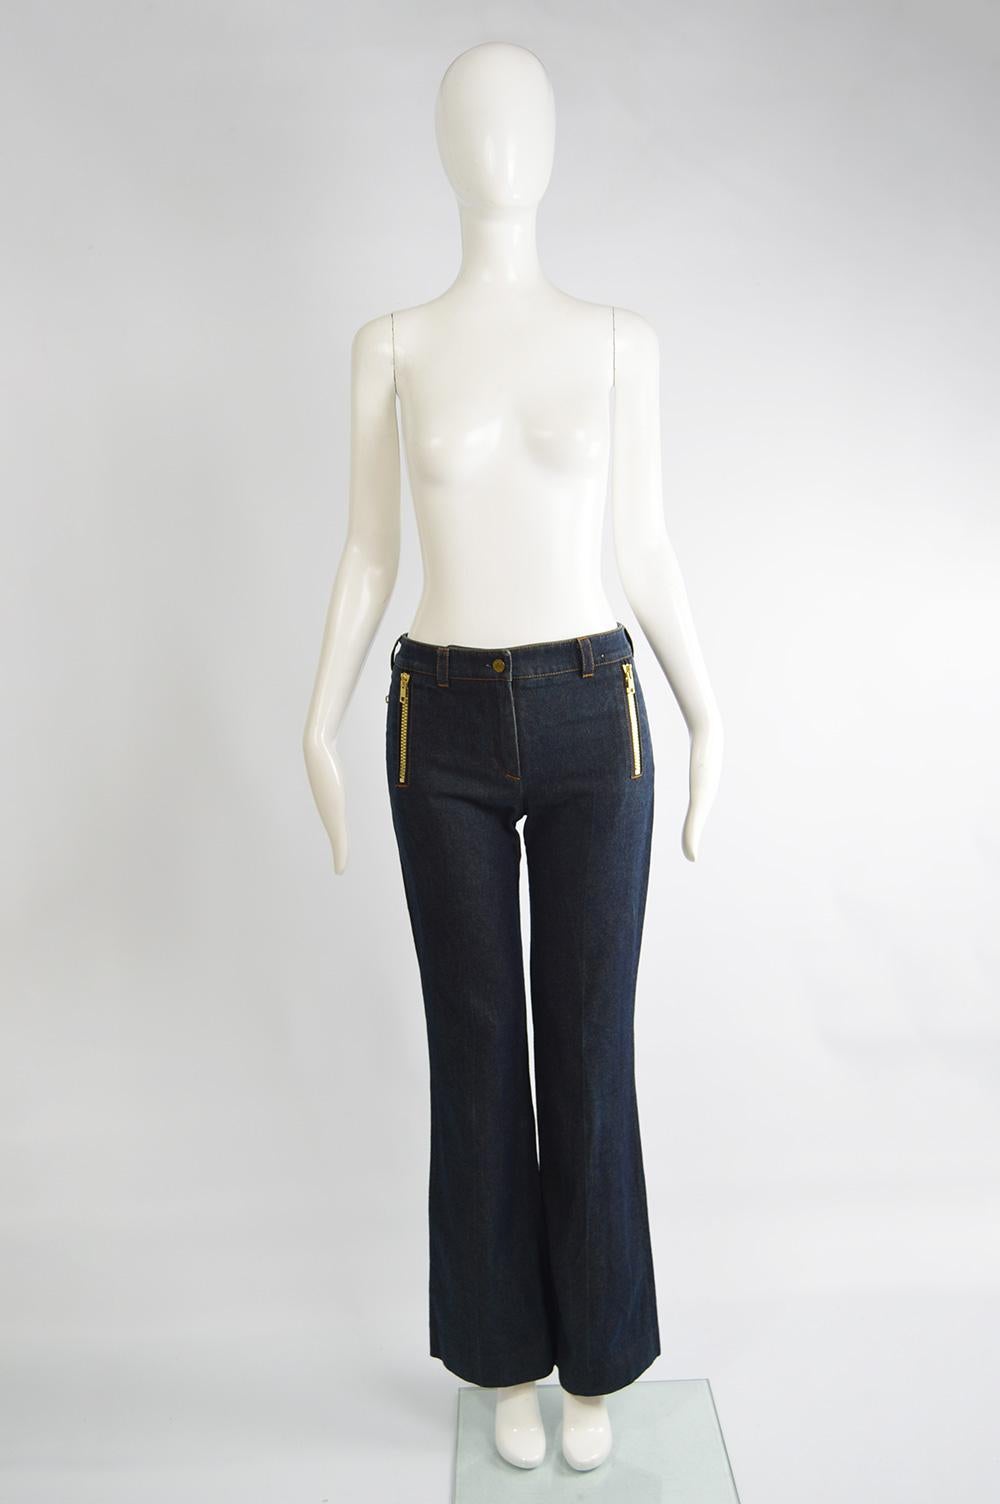 A fabulous and rare pair of Chloe jeans from the S/S 2001 collection, designed by Stella McCartney as seen on the runway. In a dark blue denim with a slightly low rise, chunky zip detailing and the iconic horse design in sequins on the back